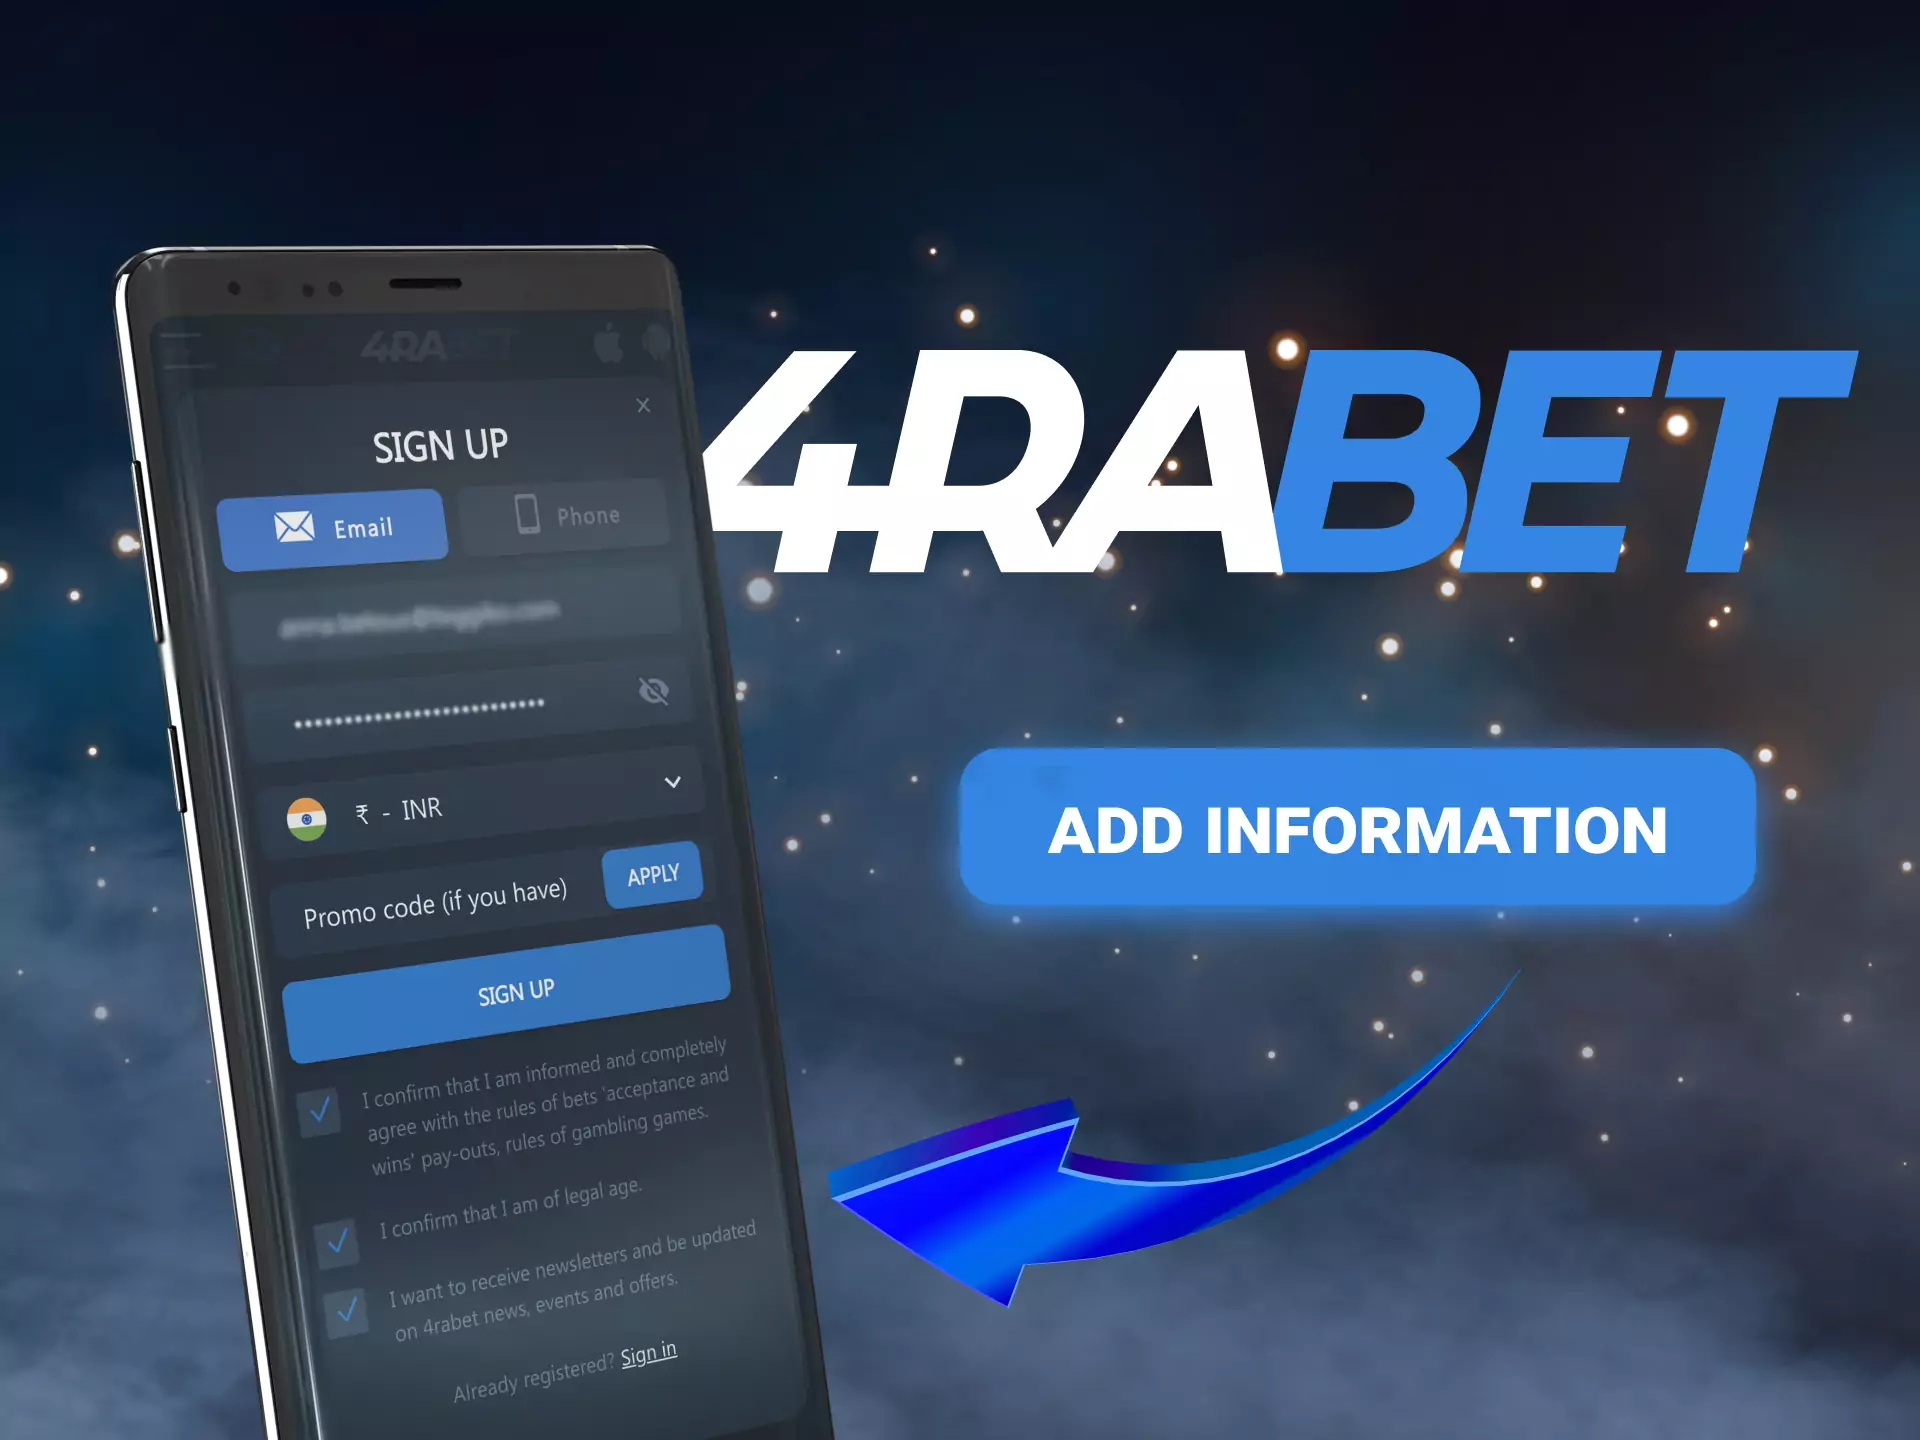 To register in the 4rabet app, add information about your data.